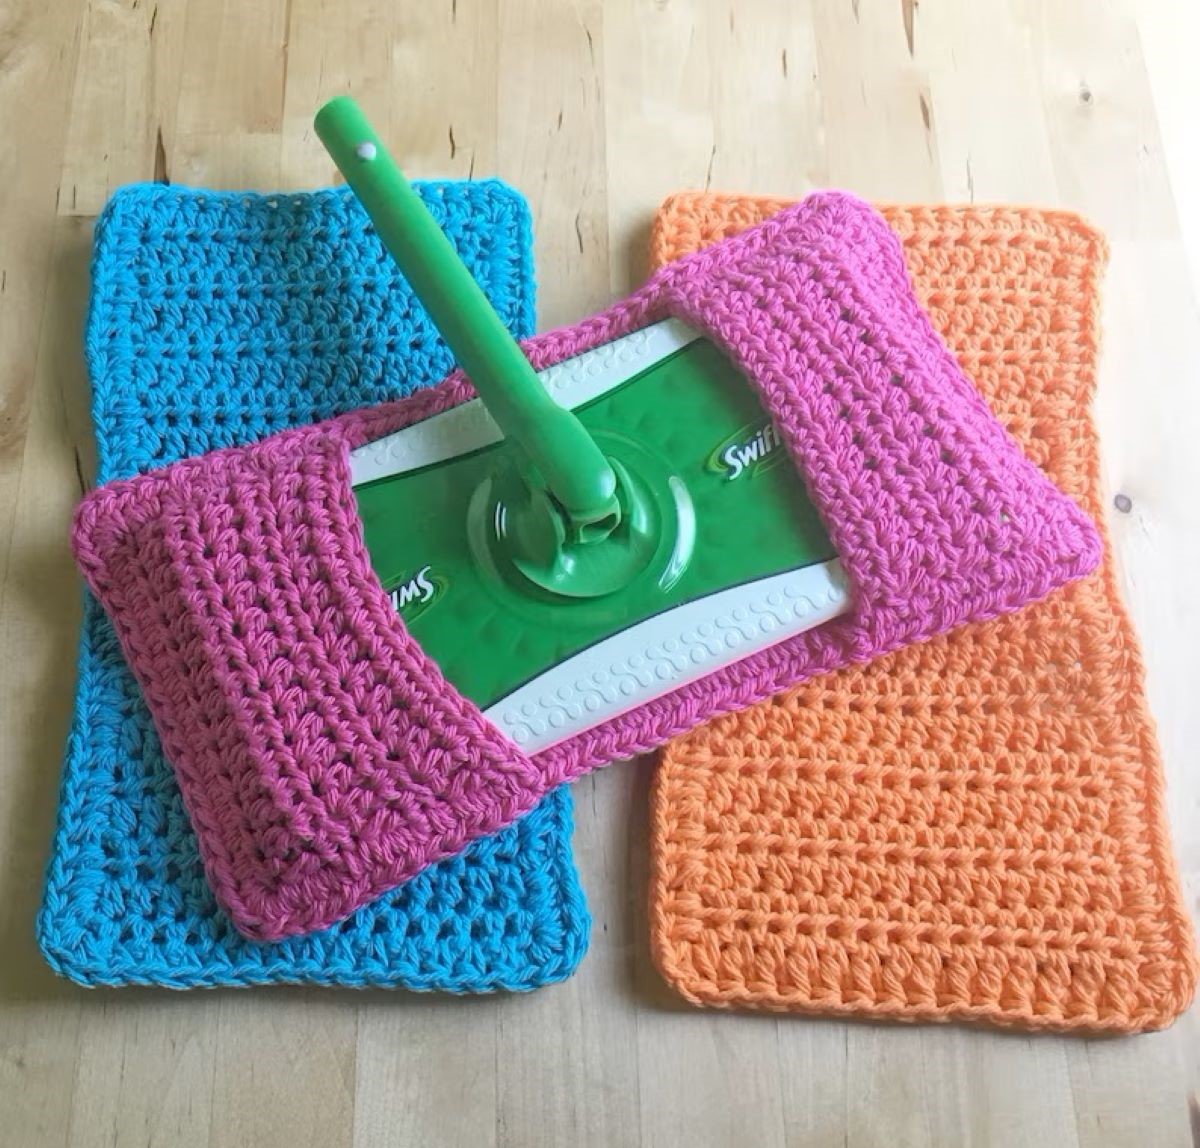 crochet patterns for beginners - colorful crochet mop pads